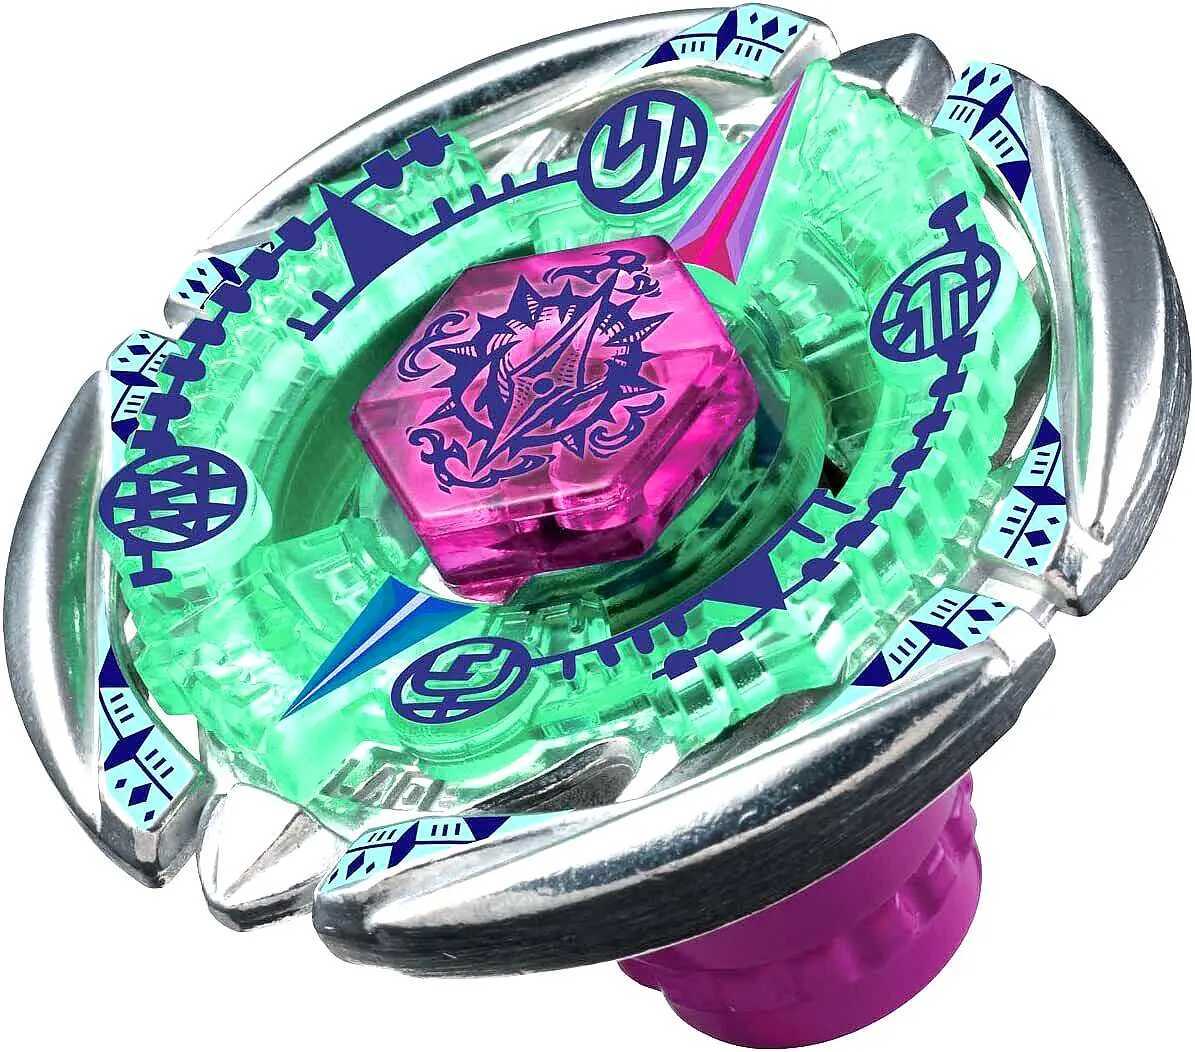 4d beyblades koreansk version av Alloy Toy Top Spinning Top Takara Tomy BB95 Flame Byxis Beyblade med Launcher Toy